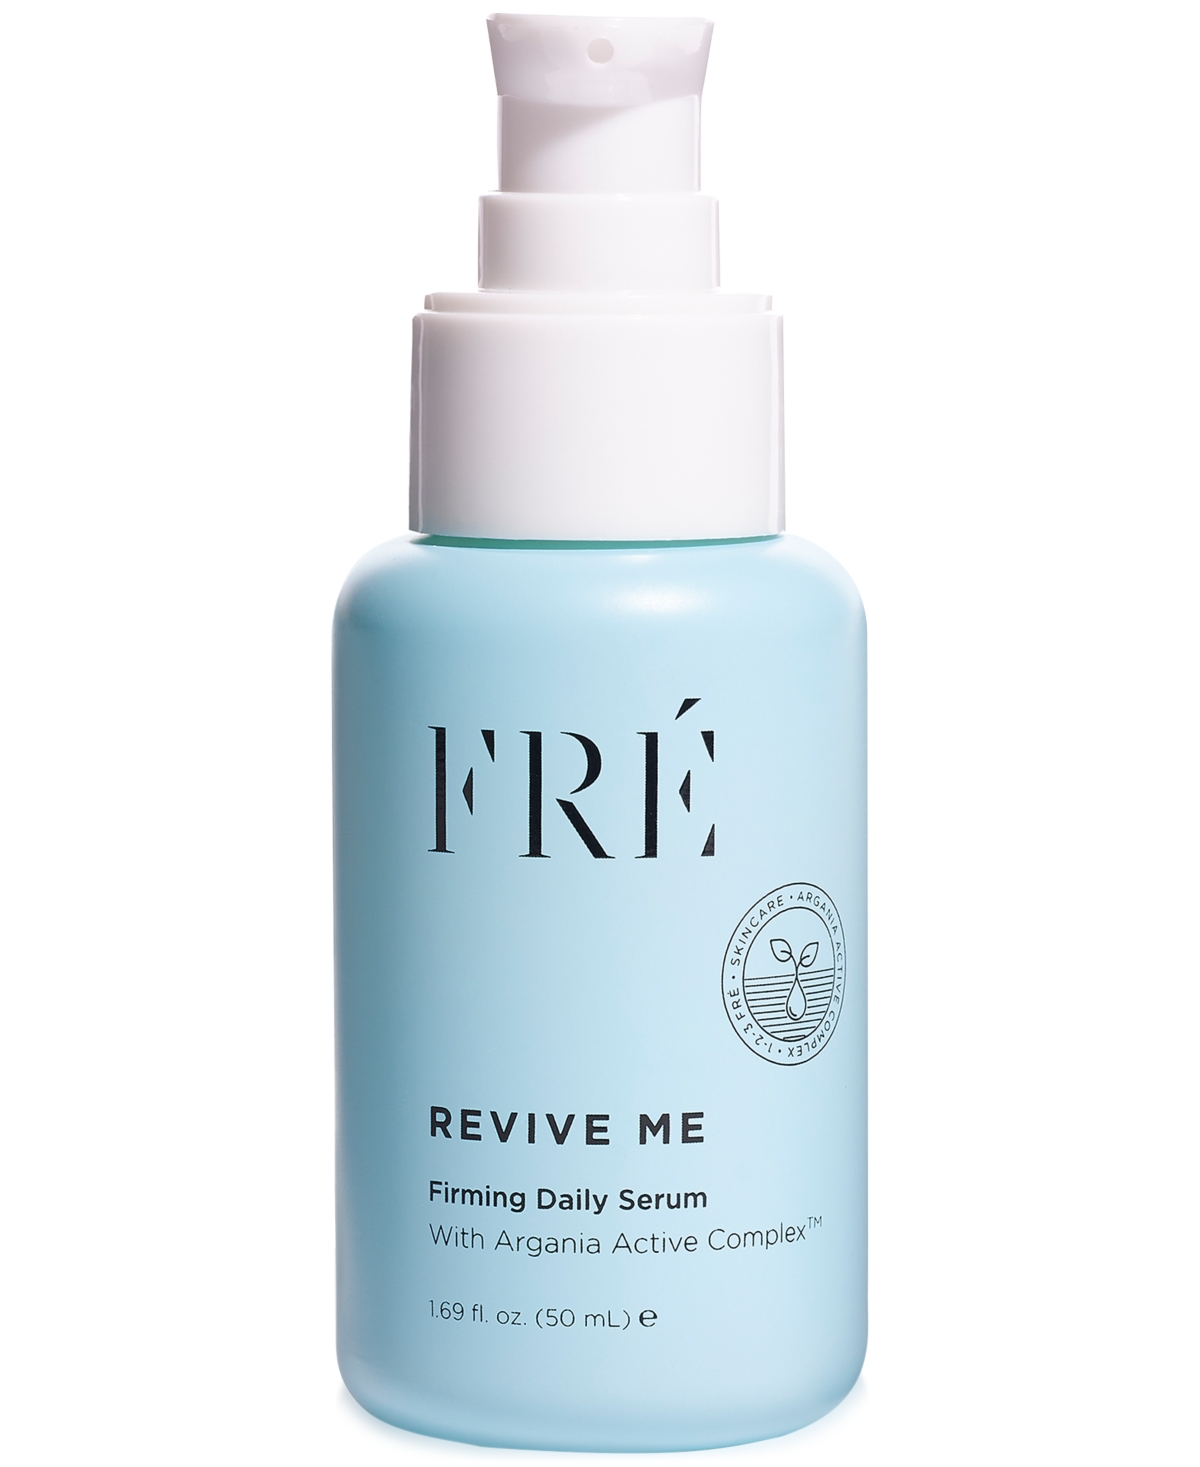 Fre Revive Me Firming Daily Serum, 1.69oz. In No Color